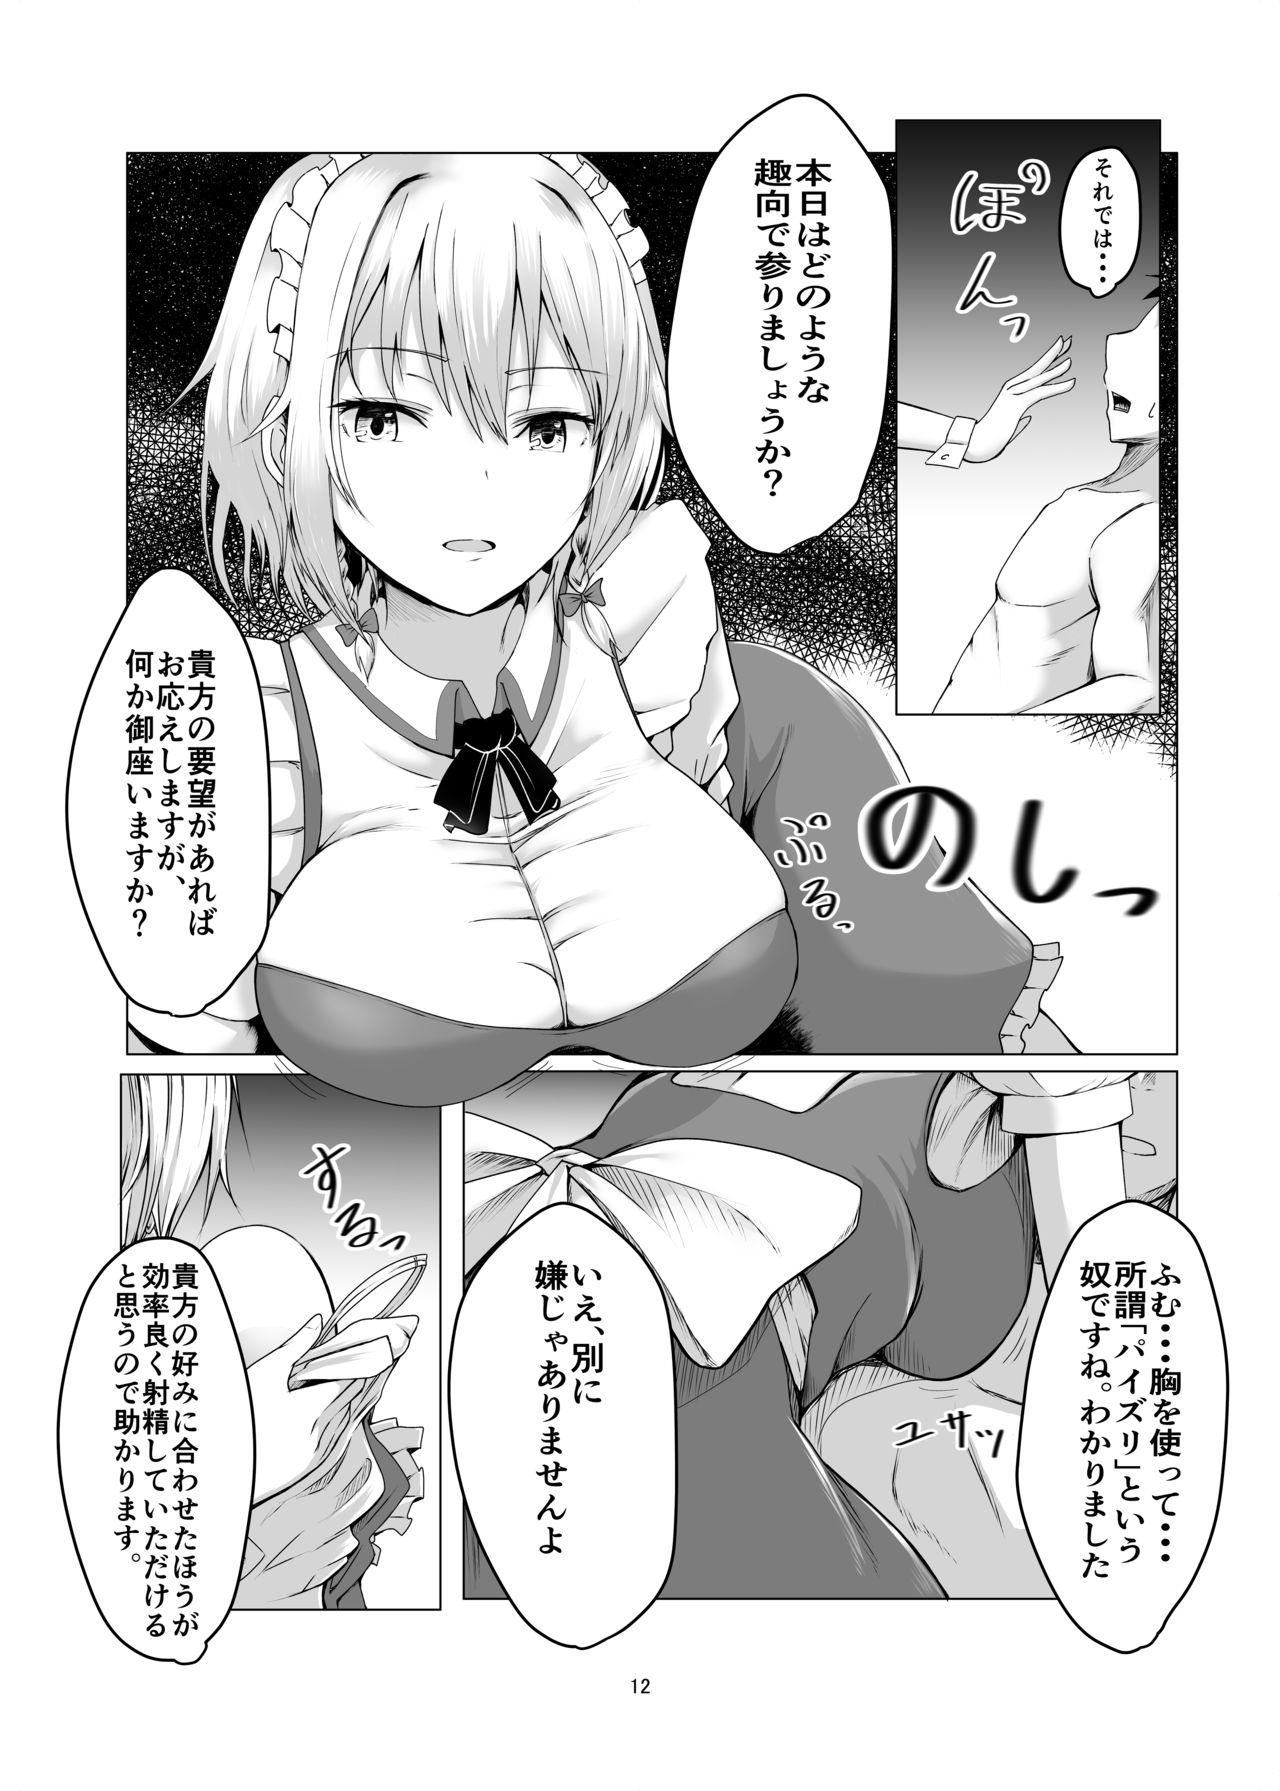 Two 咲夜さんに淡々と搾精されるマンガ - Touhou project Tamil - Page 11